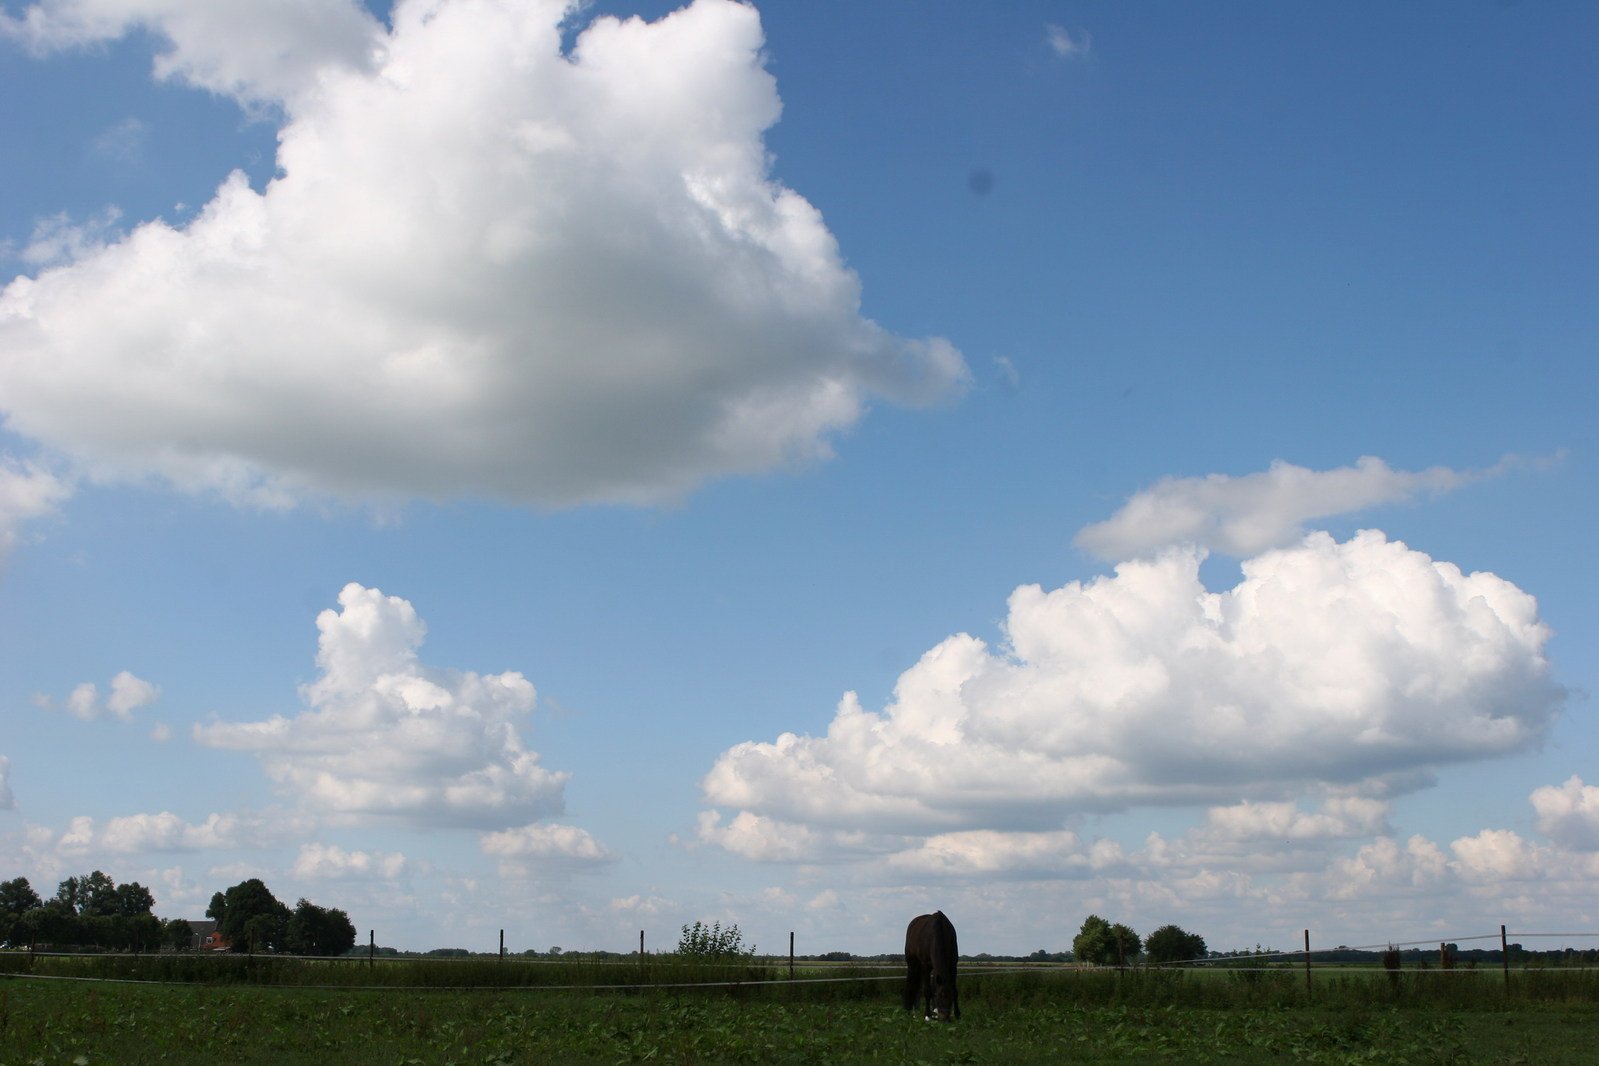 several animals grazing in a field under some clouds